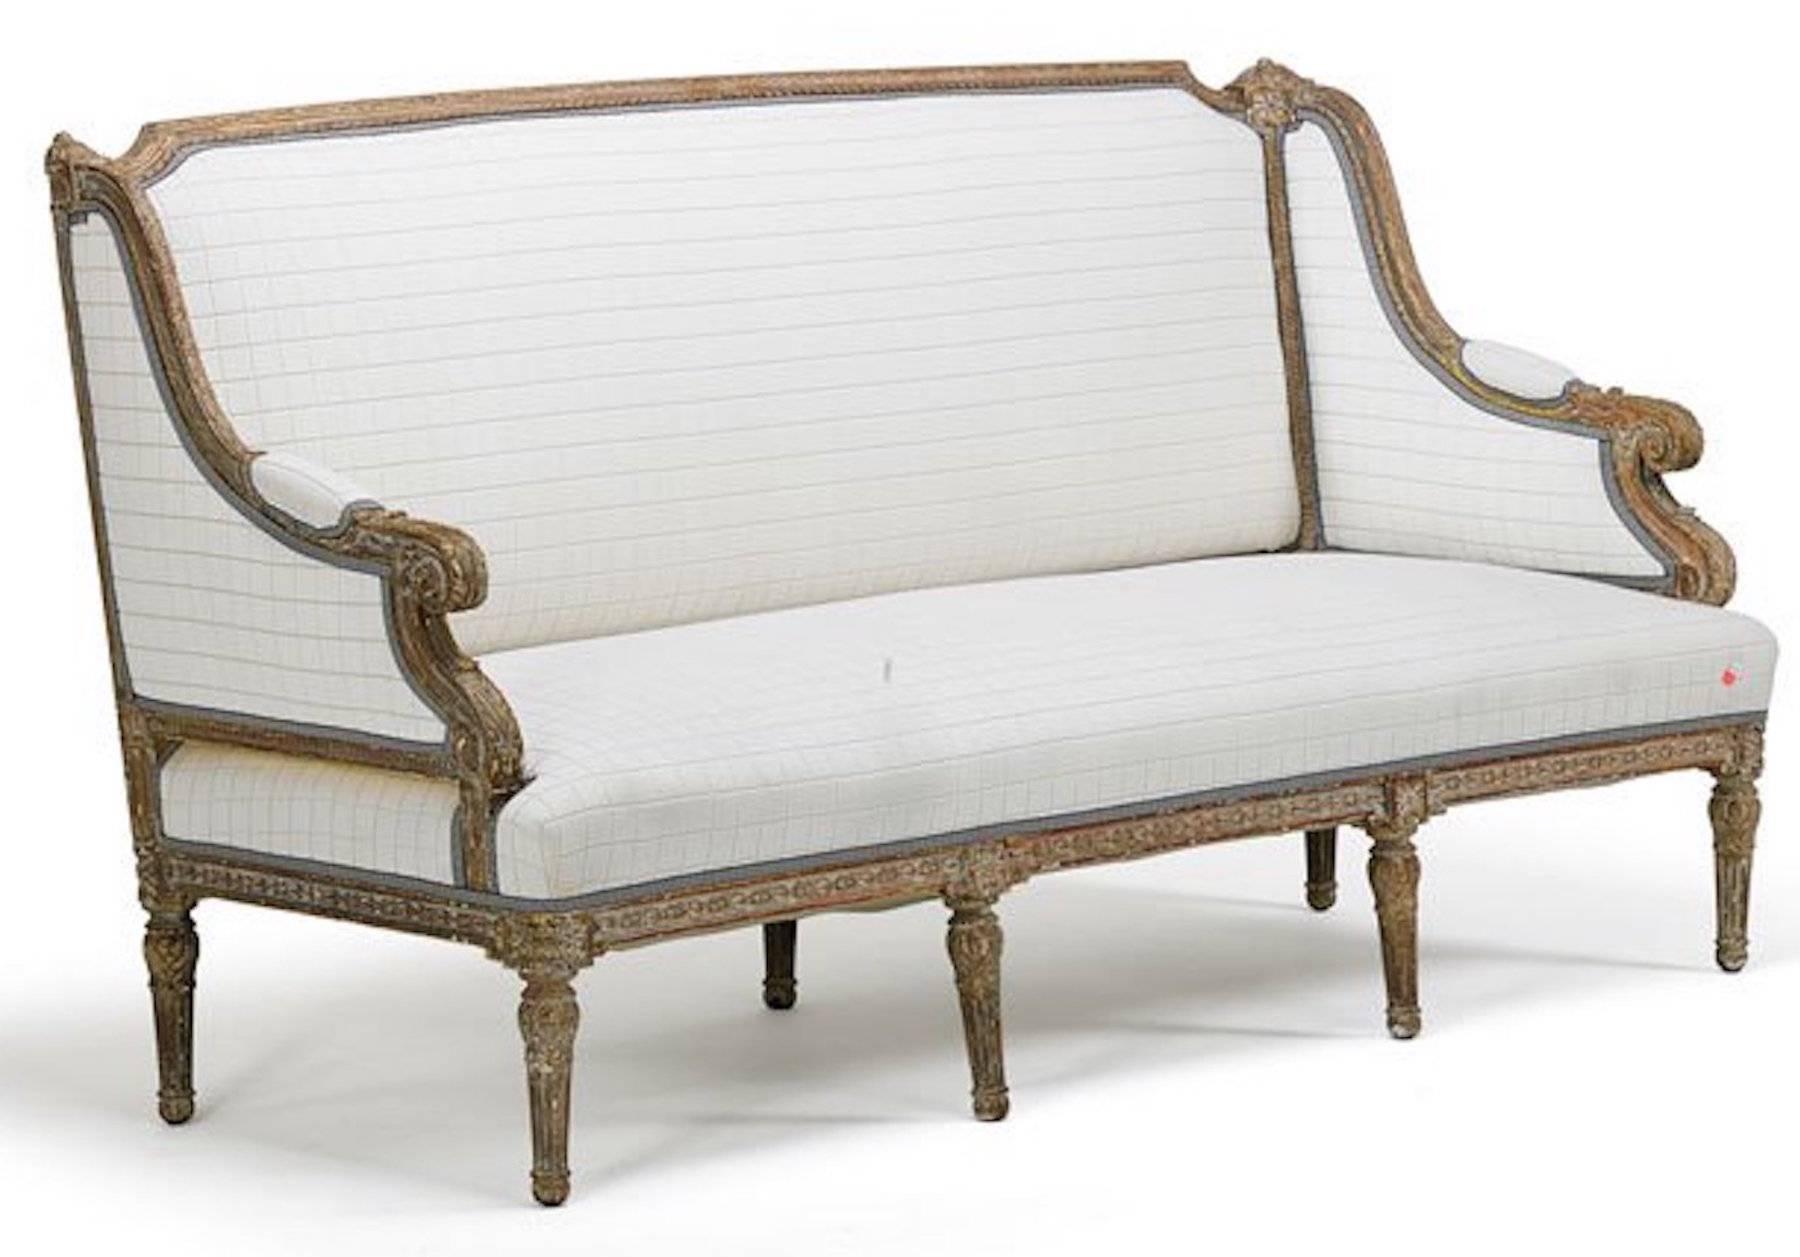 Exquisite 19th century Louis XVI style giltwood sofa with Clarence House Cashmere fabric, large in scale, very well proportioned.